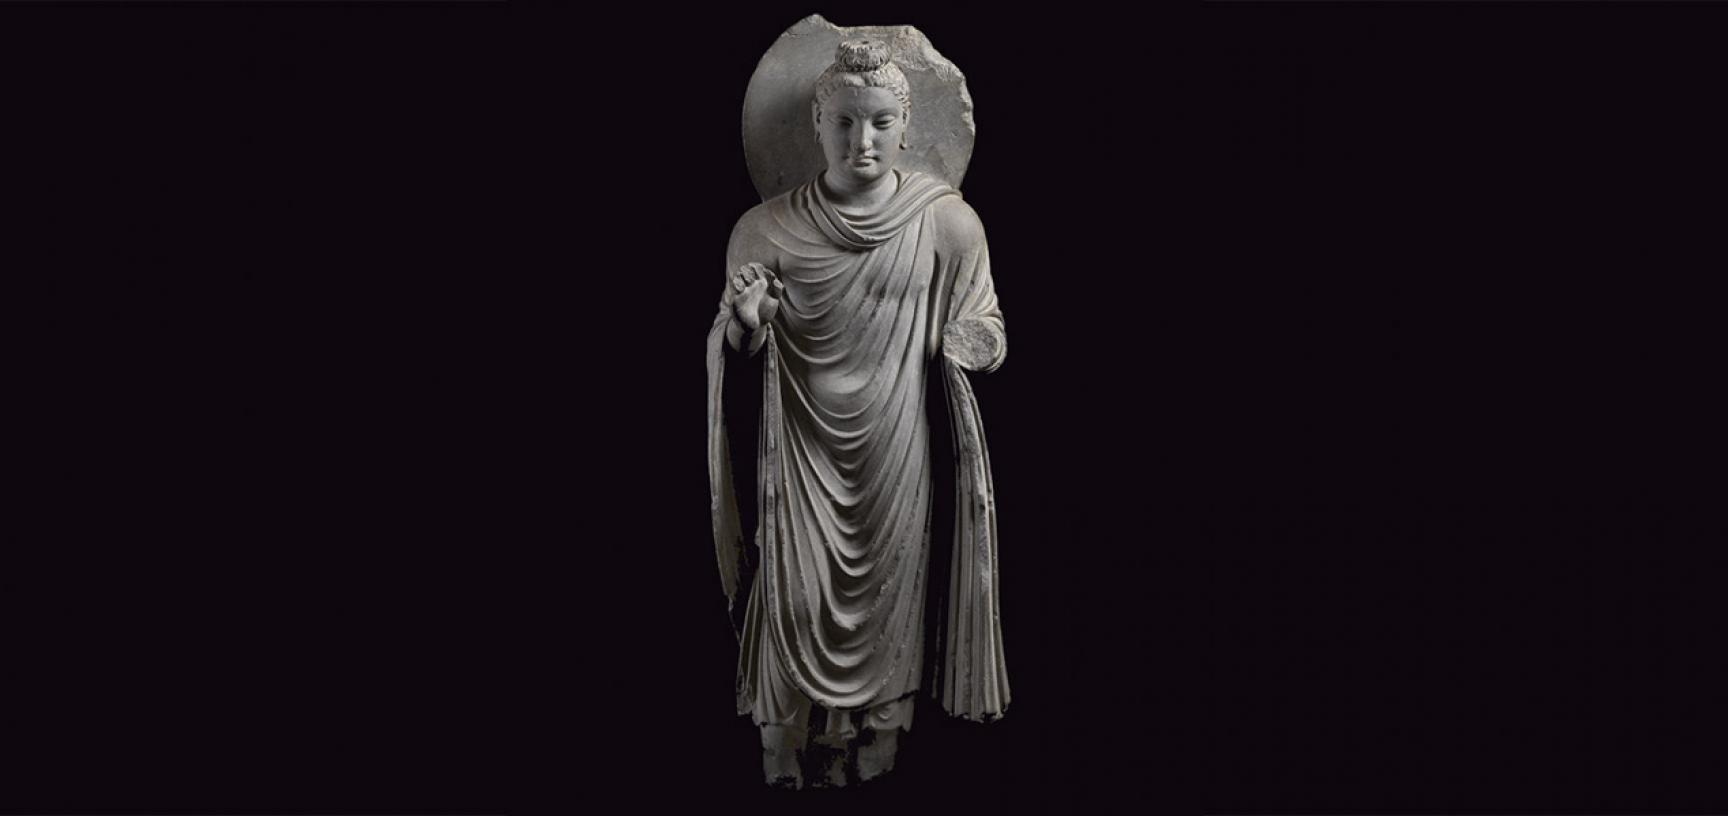 STANDING FIGURE OF THE BUDDHA from the Ashmolean collections